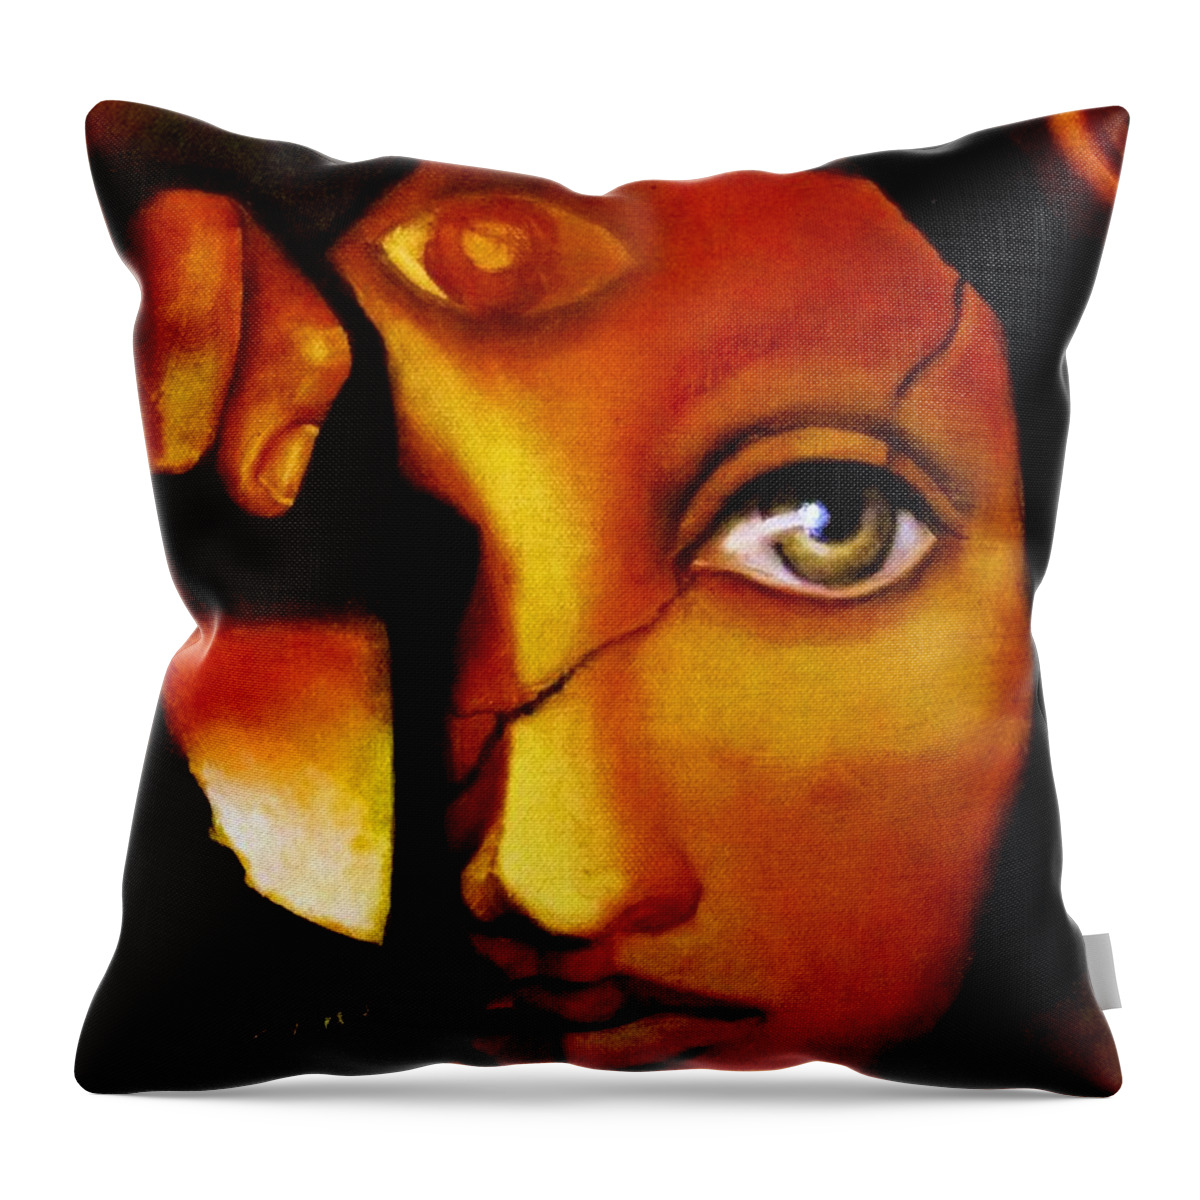 Original Painting Throw Pillow featuring the painting The Seeker by Dalgis Edelson